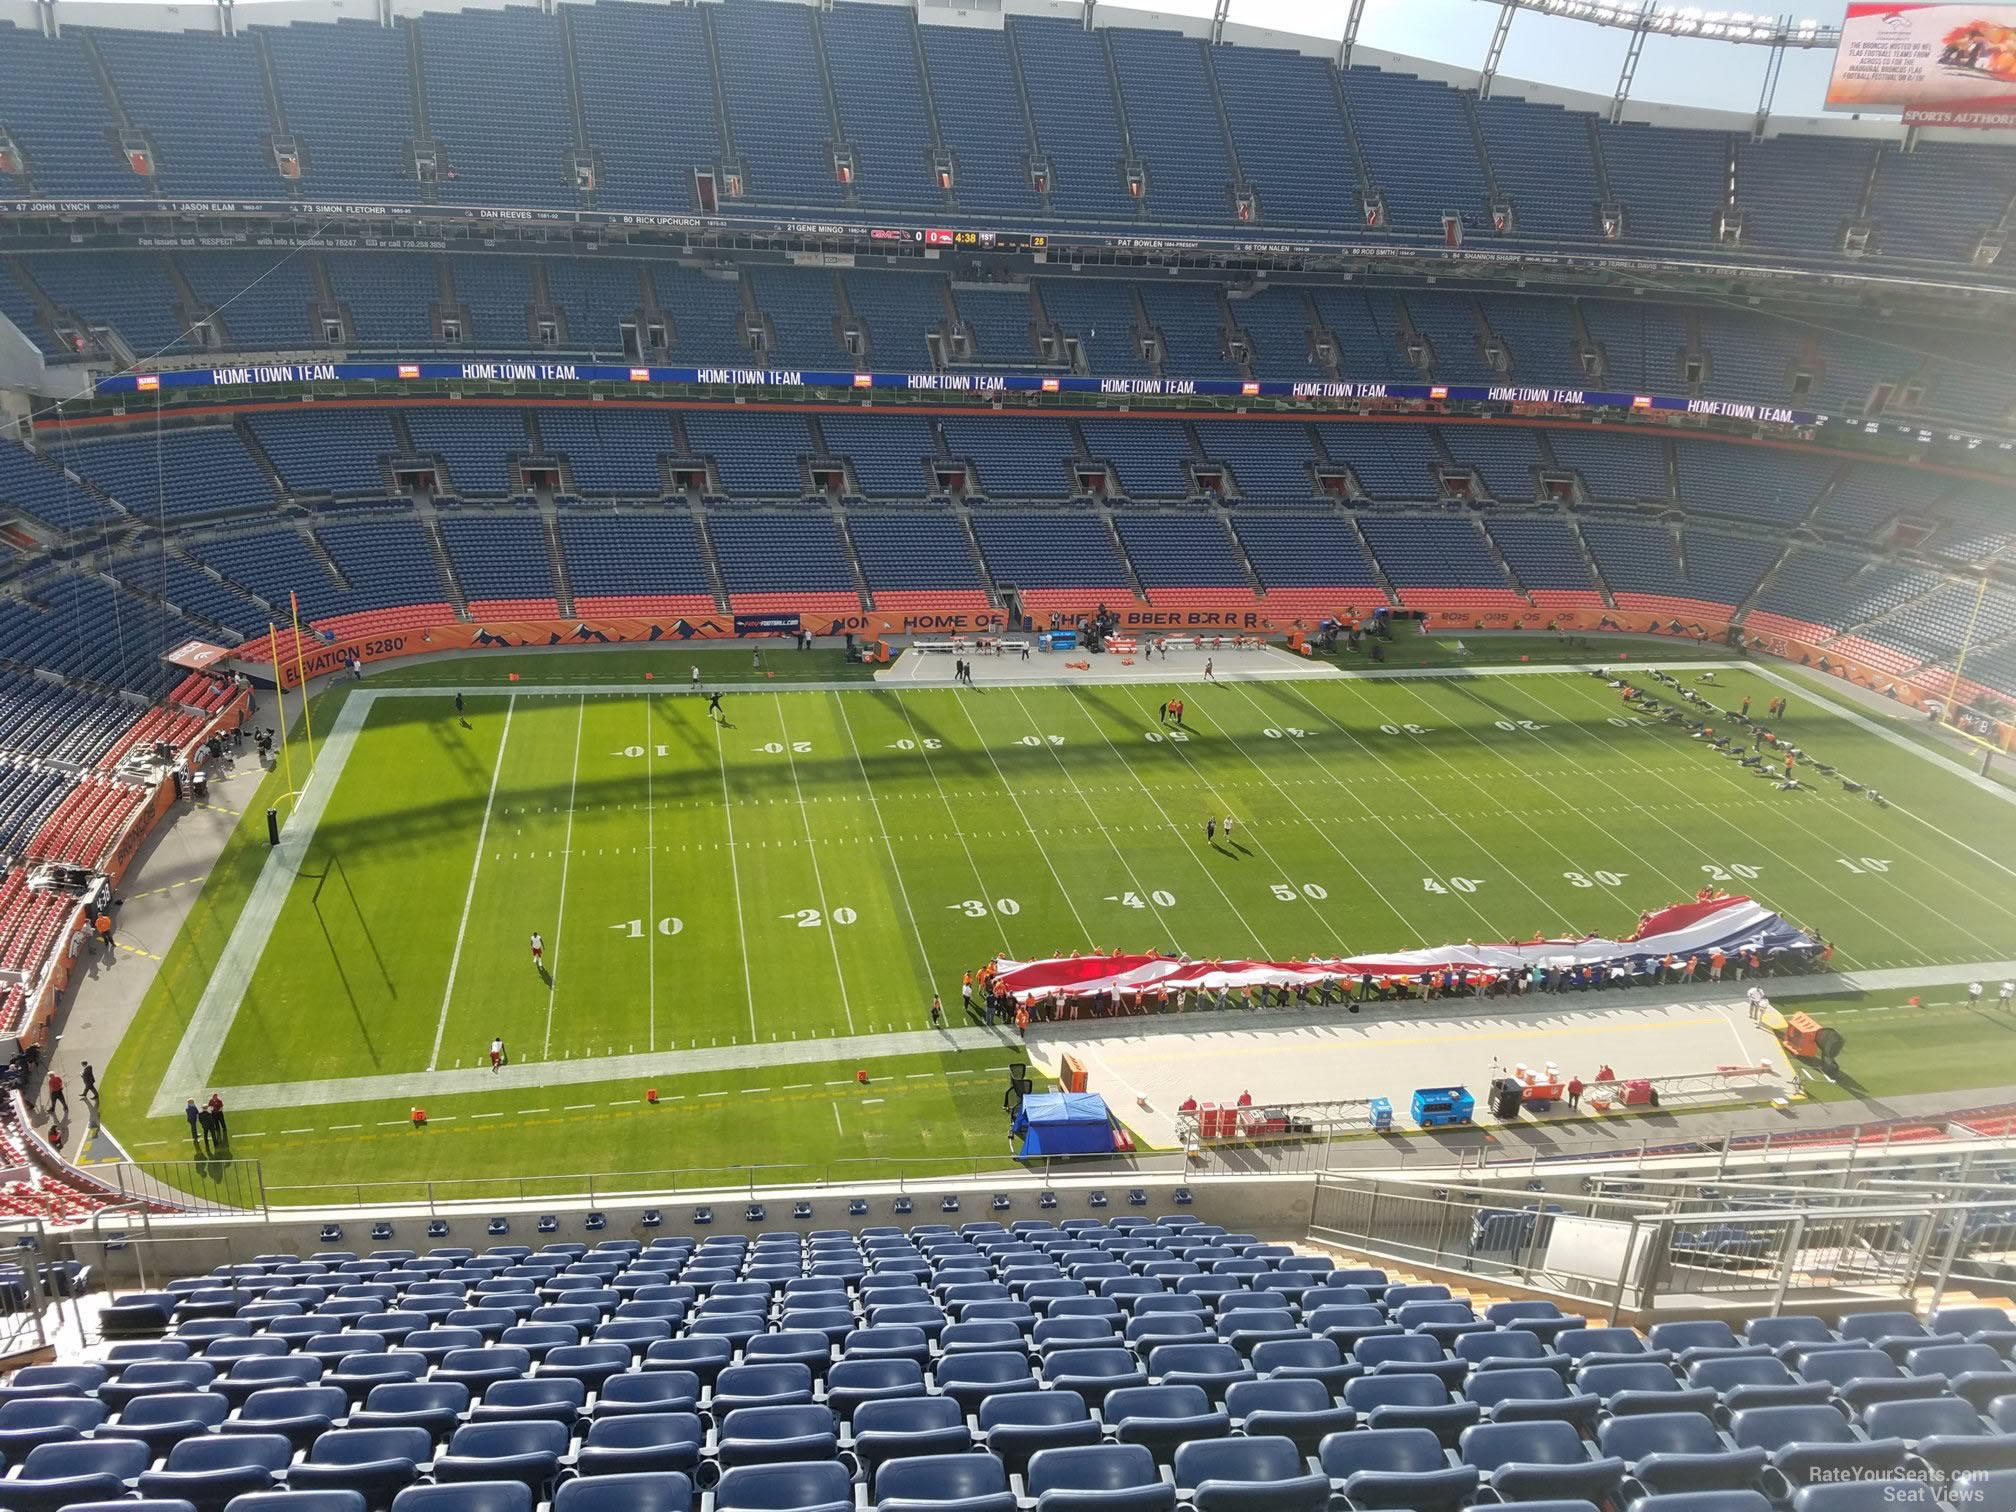 section 537, row 16 seat view  - empower field (at mile high)